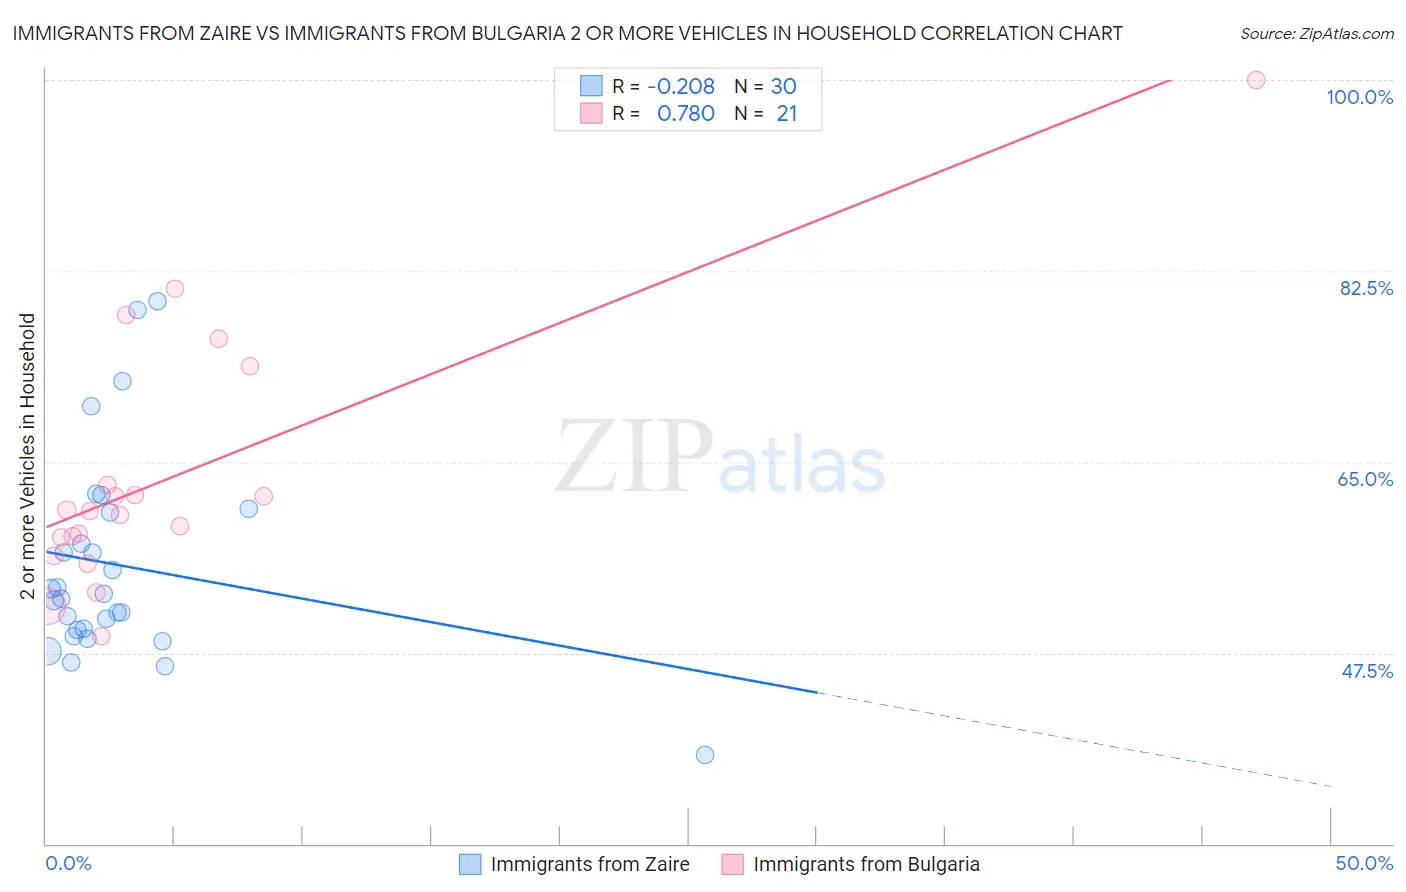 Immigrants from Zaire vs Immigrants from Bulgaria 2 or more Vehicles in Household